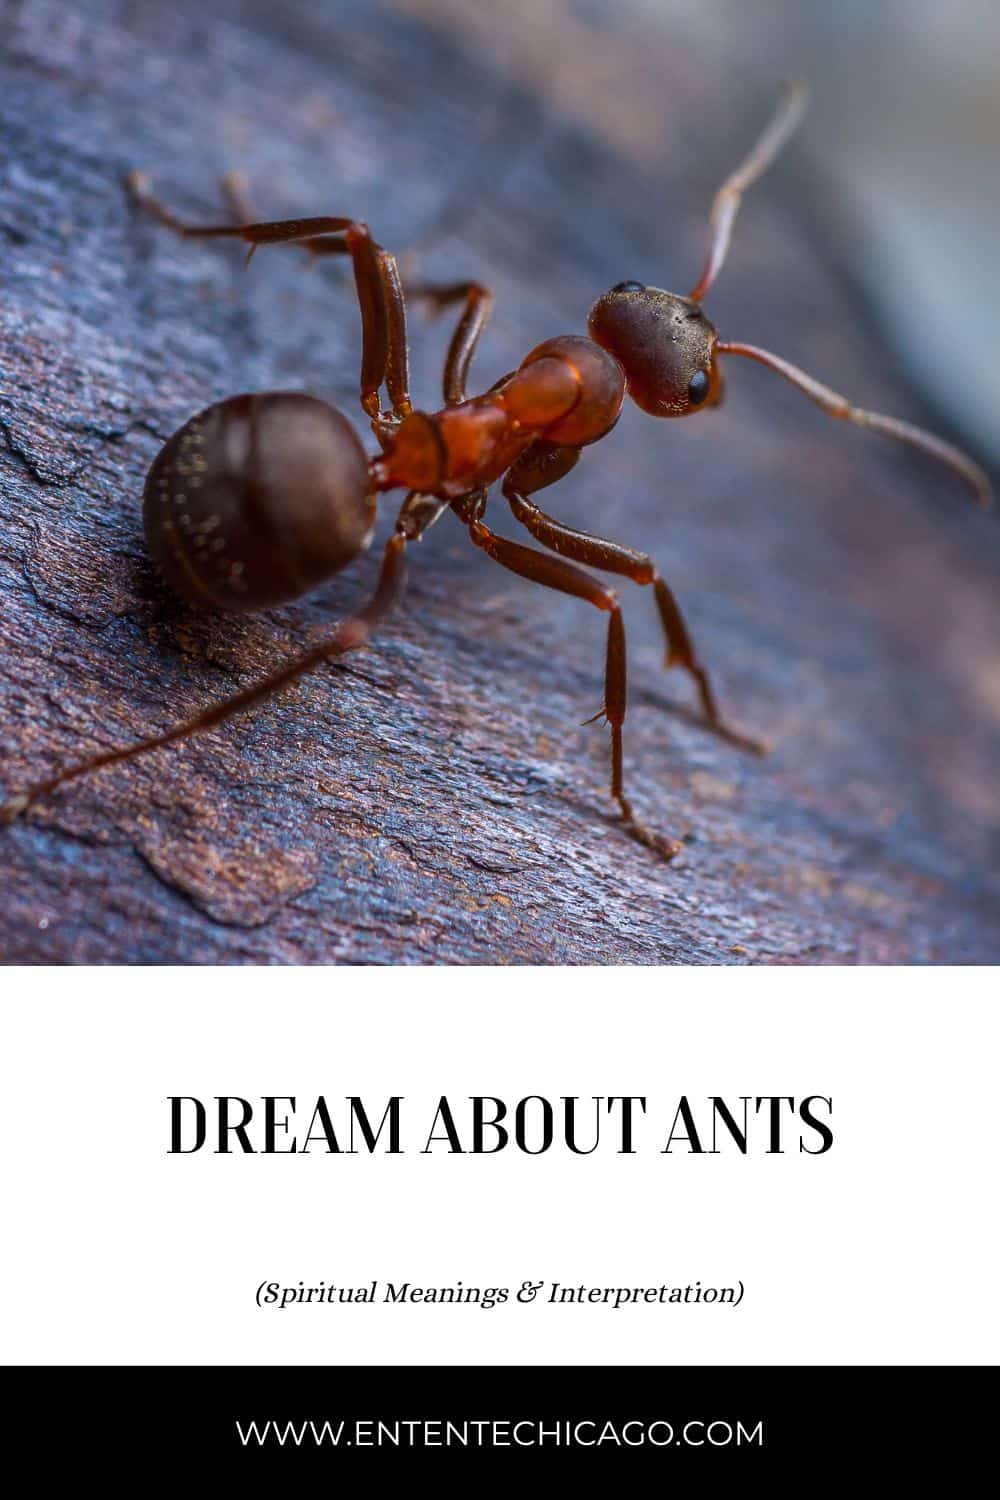 General Meaning of Ants in Dreams